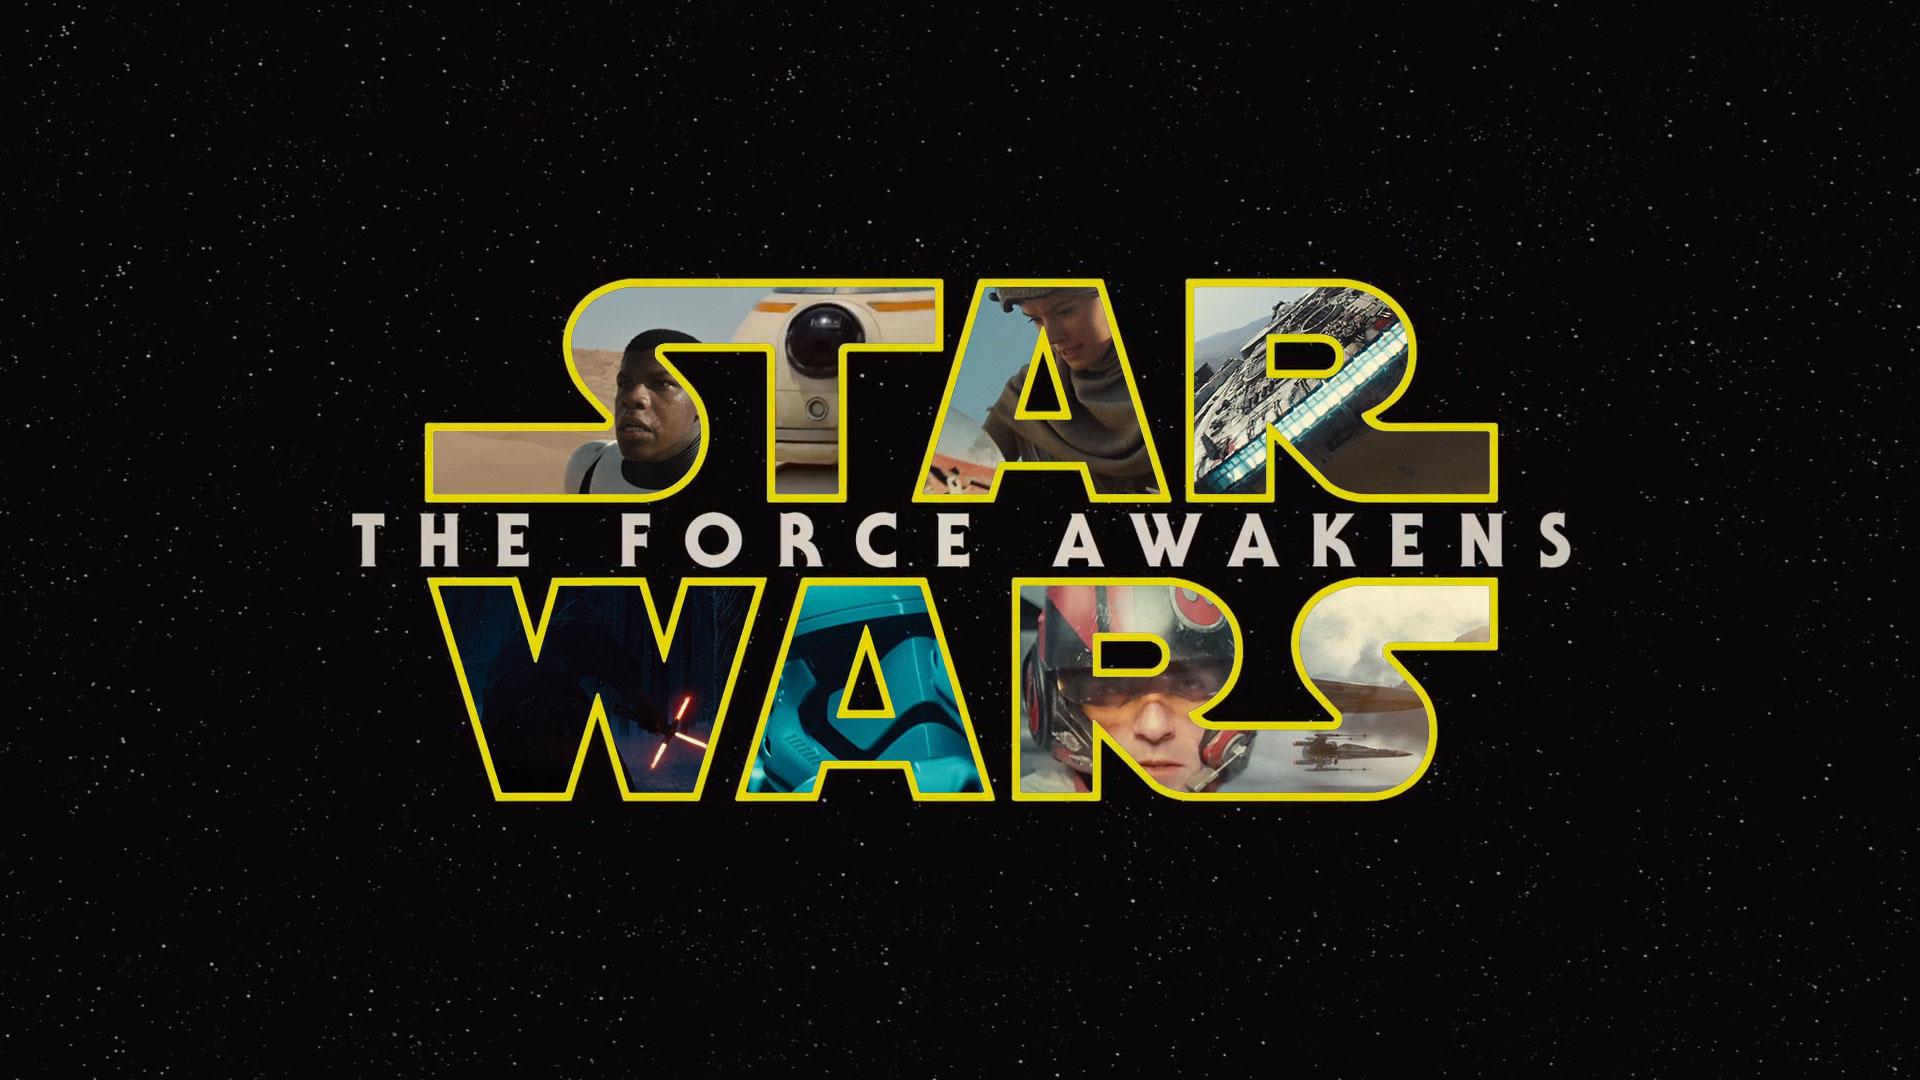 Star Wars The Force Awakens Wallpapers and Lego Trailer